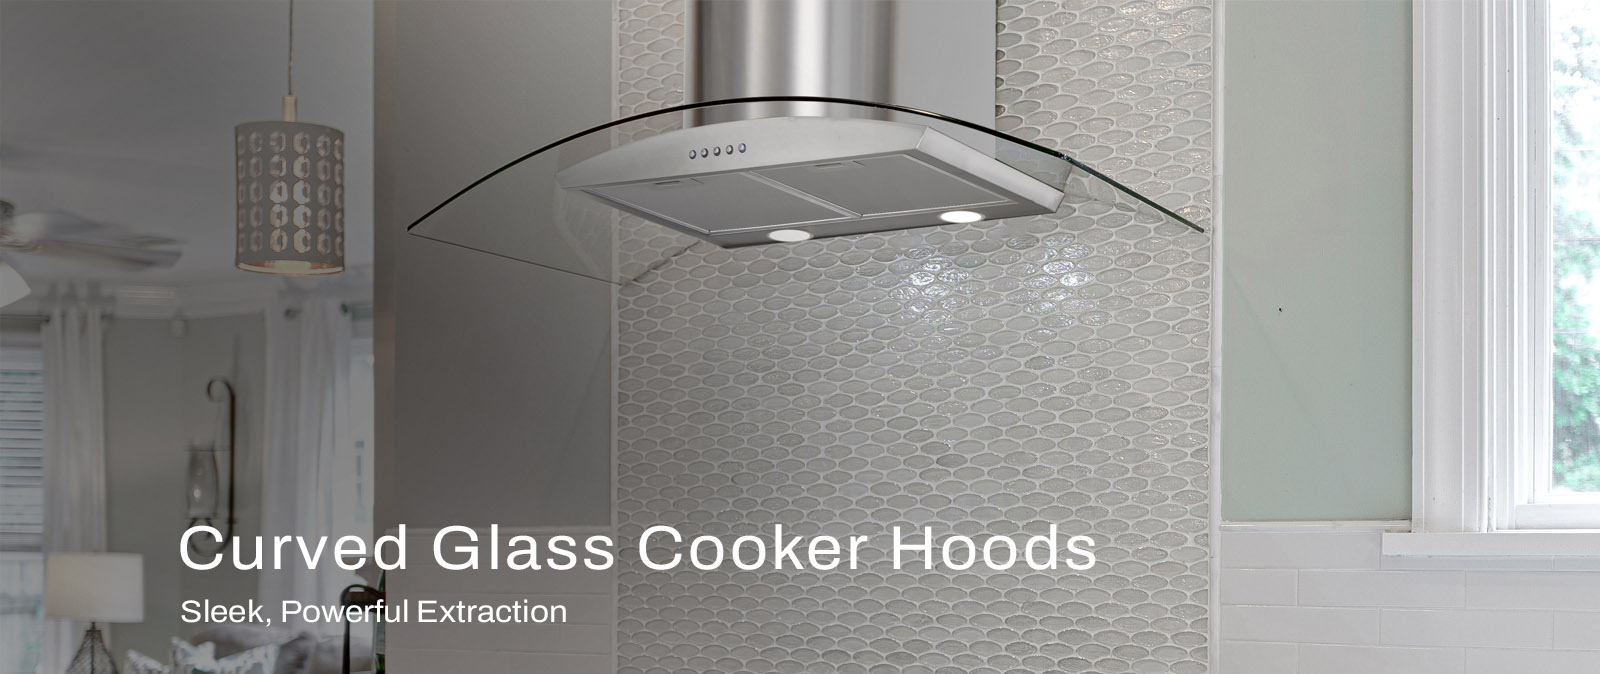 Curved Glass Wall Mounted Cooker Hoods